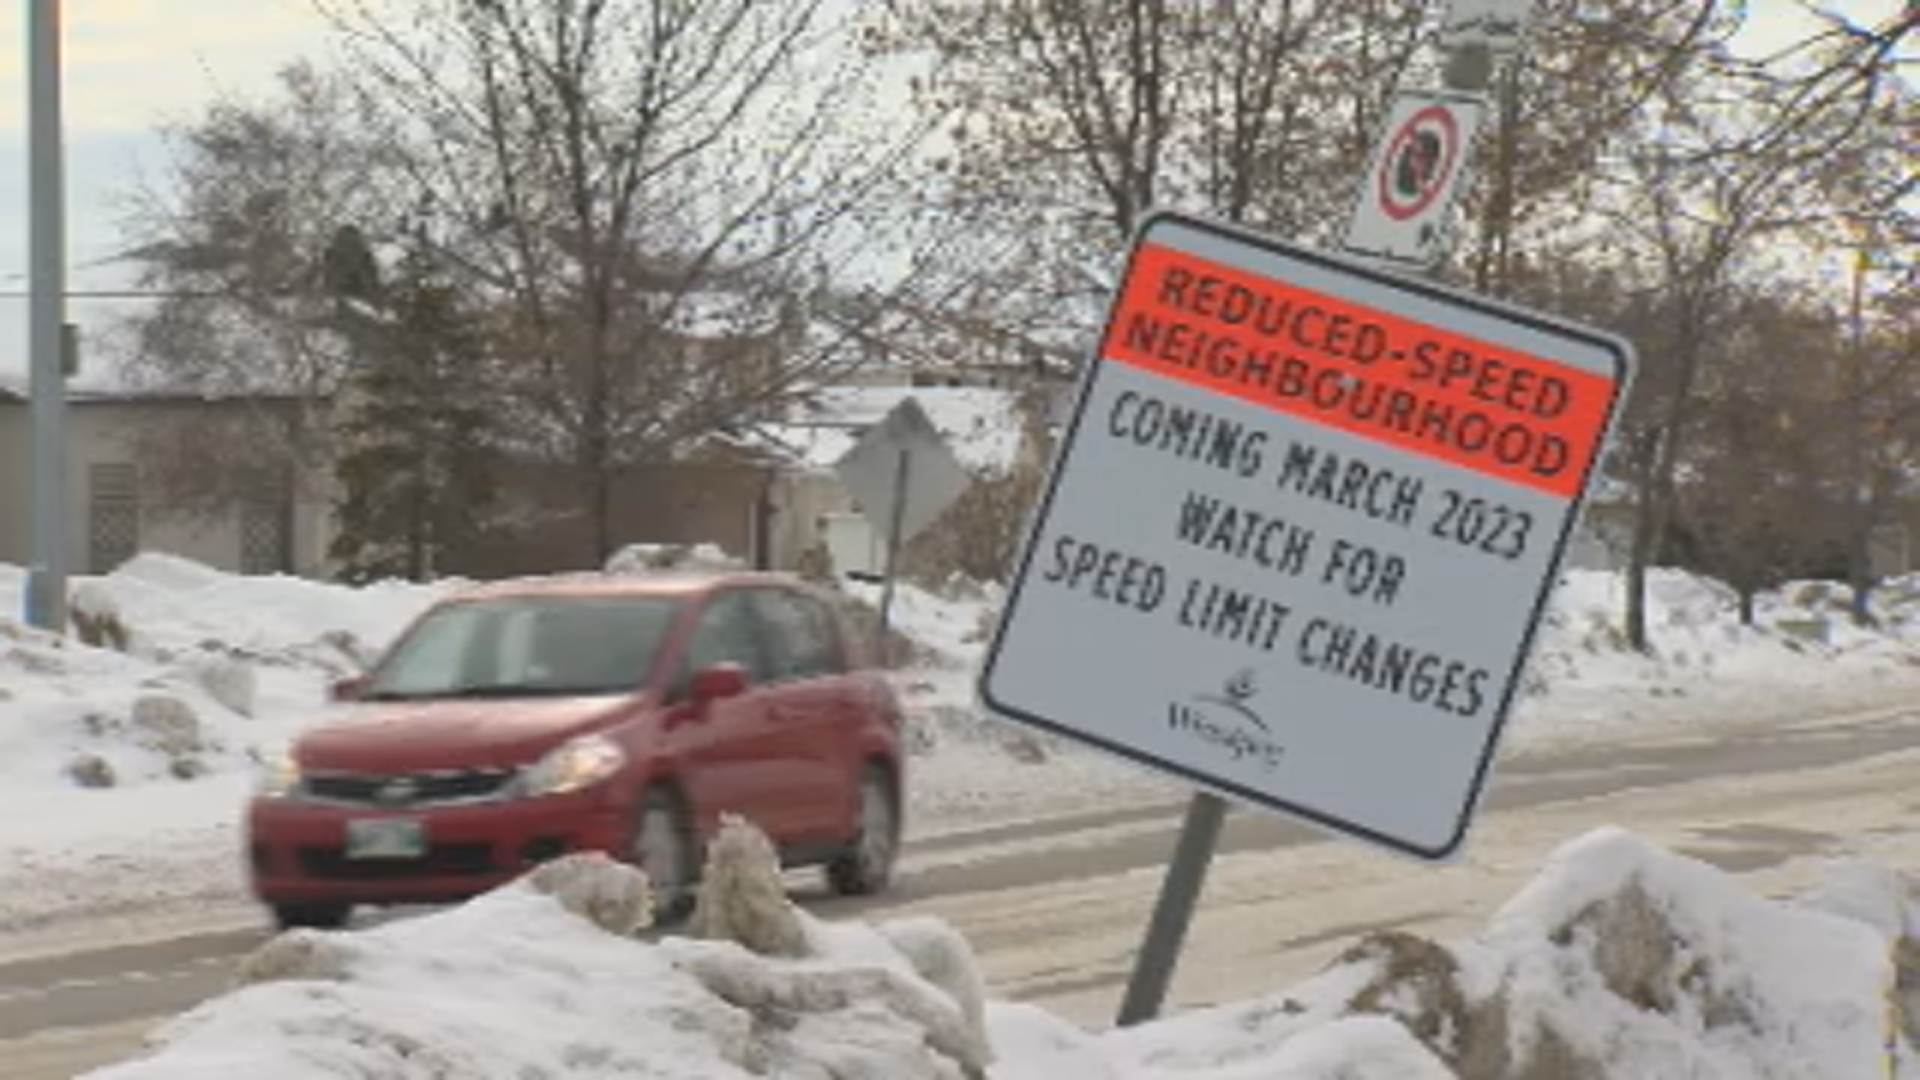 A reduced speed pilot project is set to start on Wednesday, March 1, and it will lower speed limits to 30 kilometres per hour in some Winnipeg neighbourhoods. .